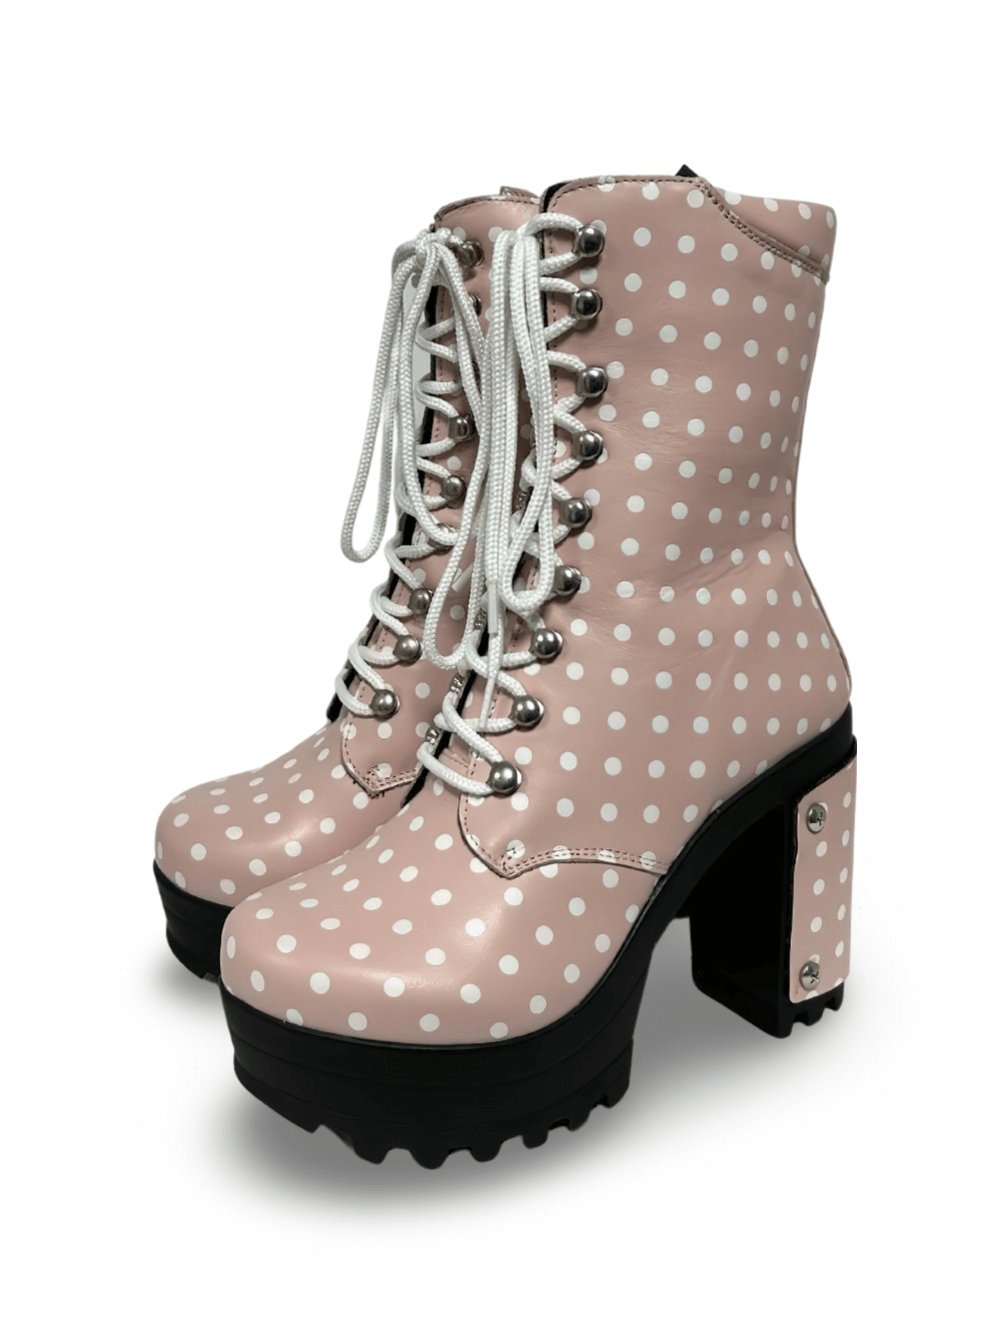 Chic Polka Dot Platform Shoes with Lace-up Detail